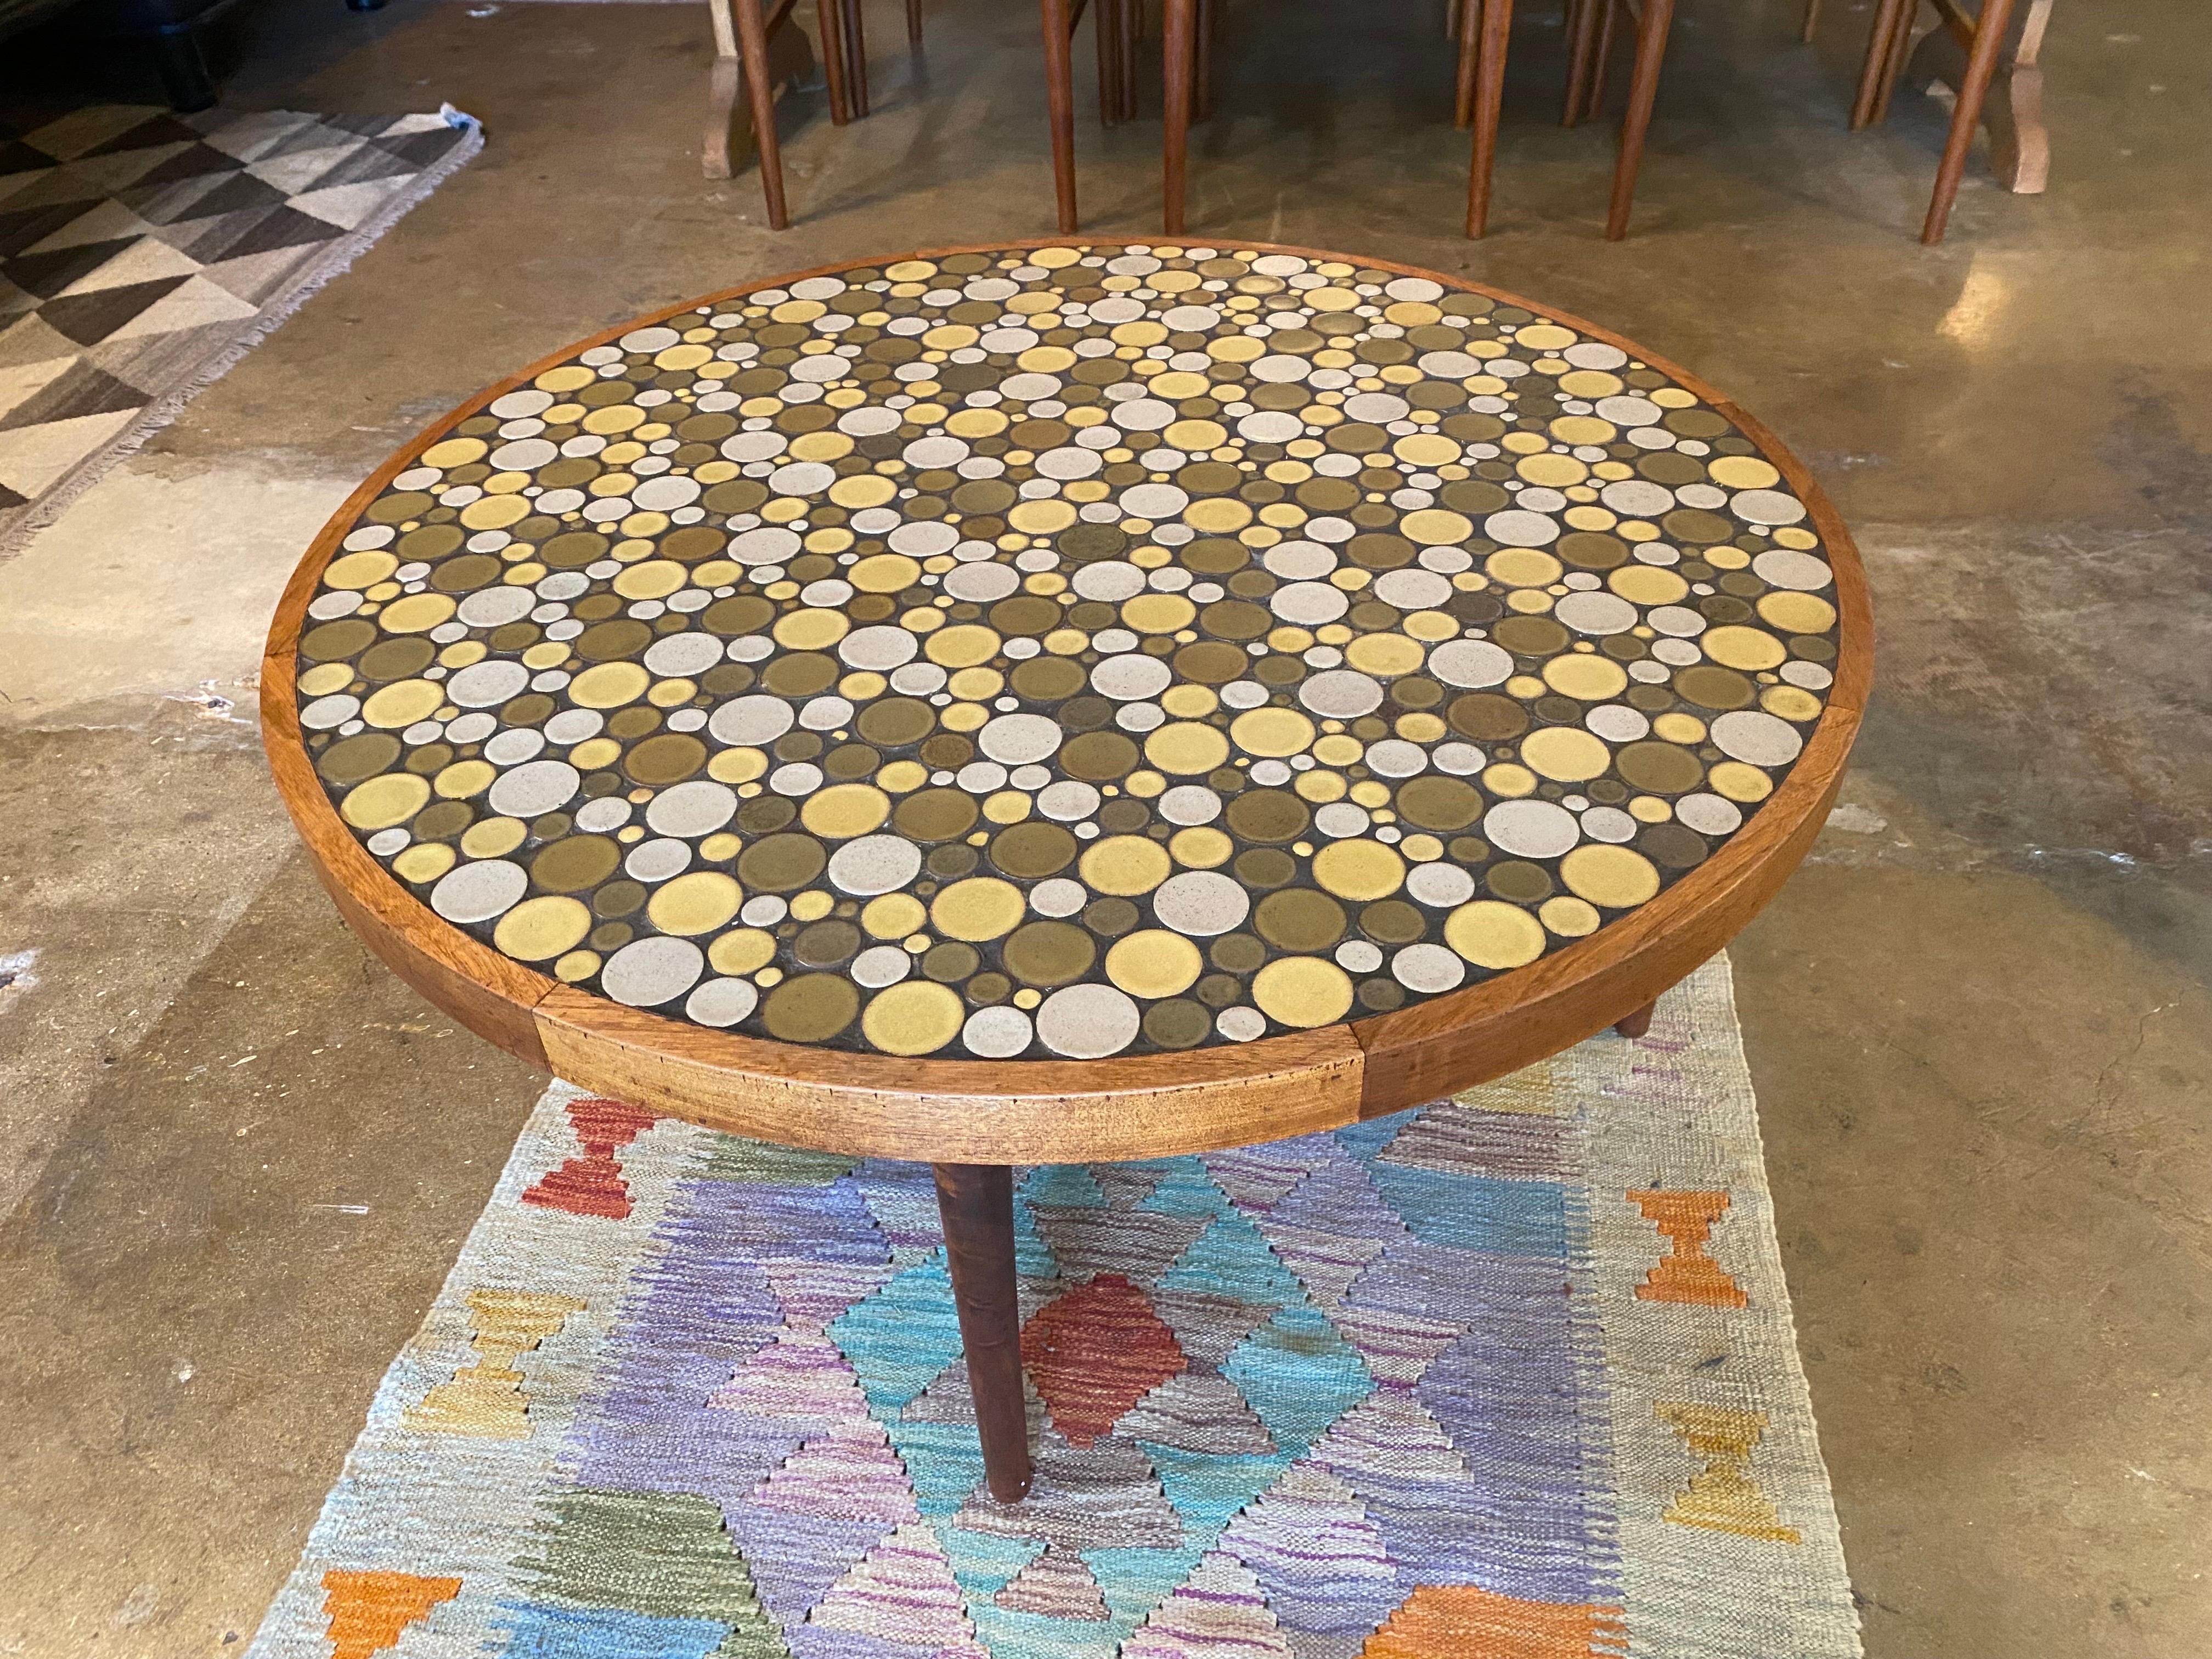 Mid-Century Modern ceramic coin tile top coffee table, designed by Jane and Gordon Martz for Marshall Studio. features a walnut frame with an inlaid ceramic round top. Coin tiles in earthy shades of olive, light yellow, and grey. This table is in